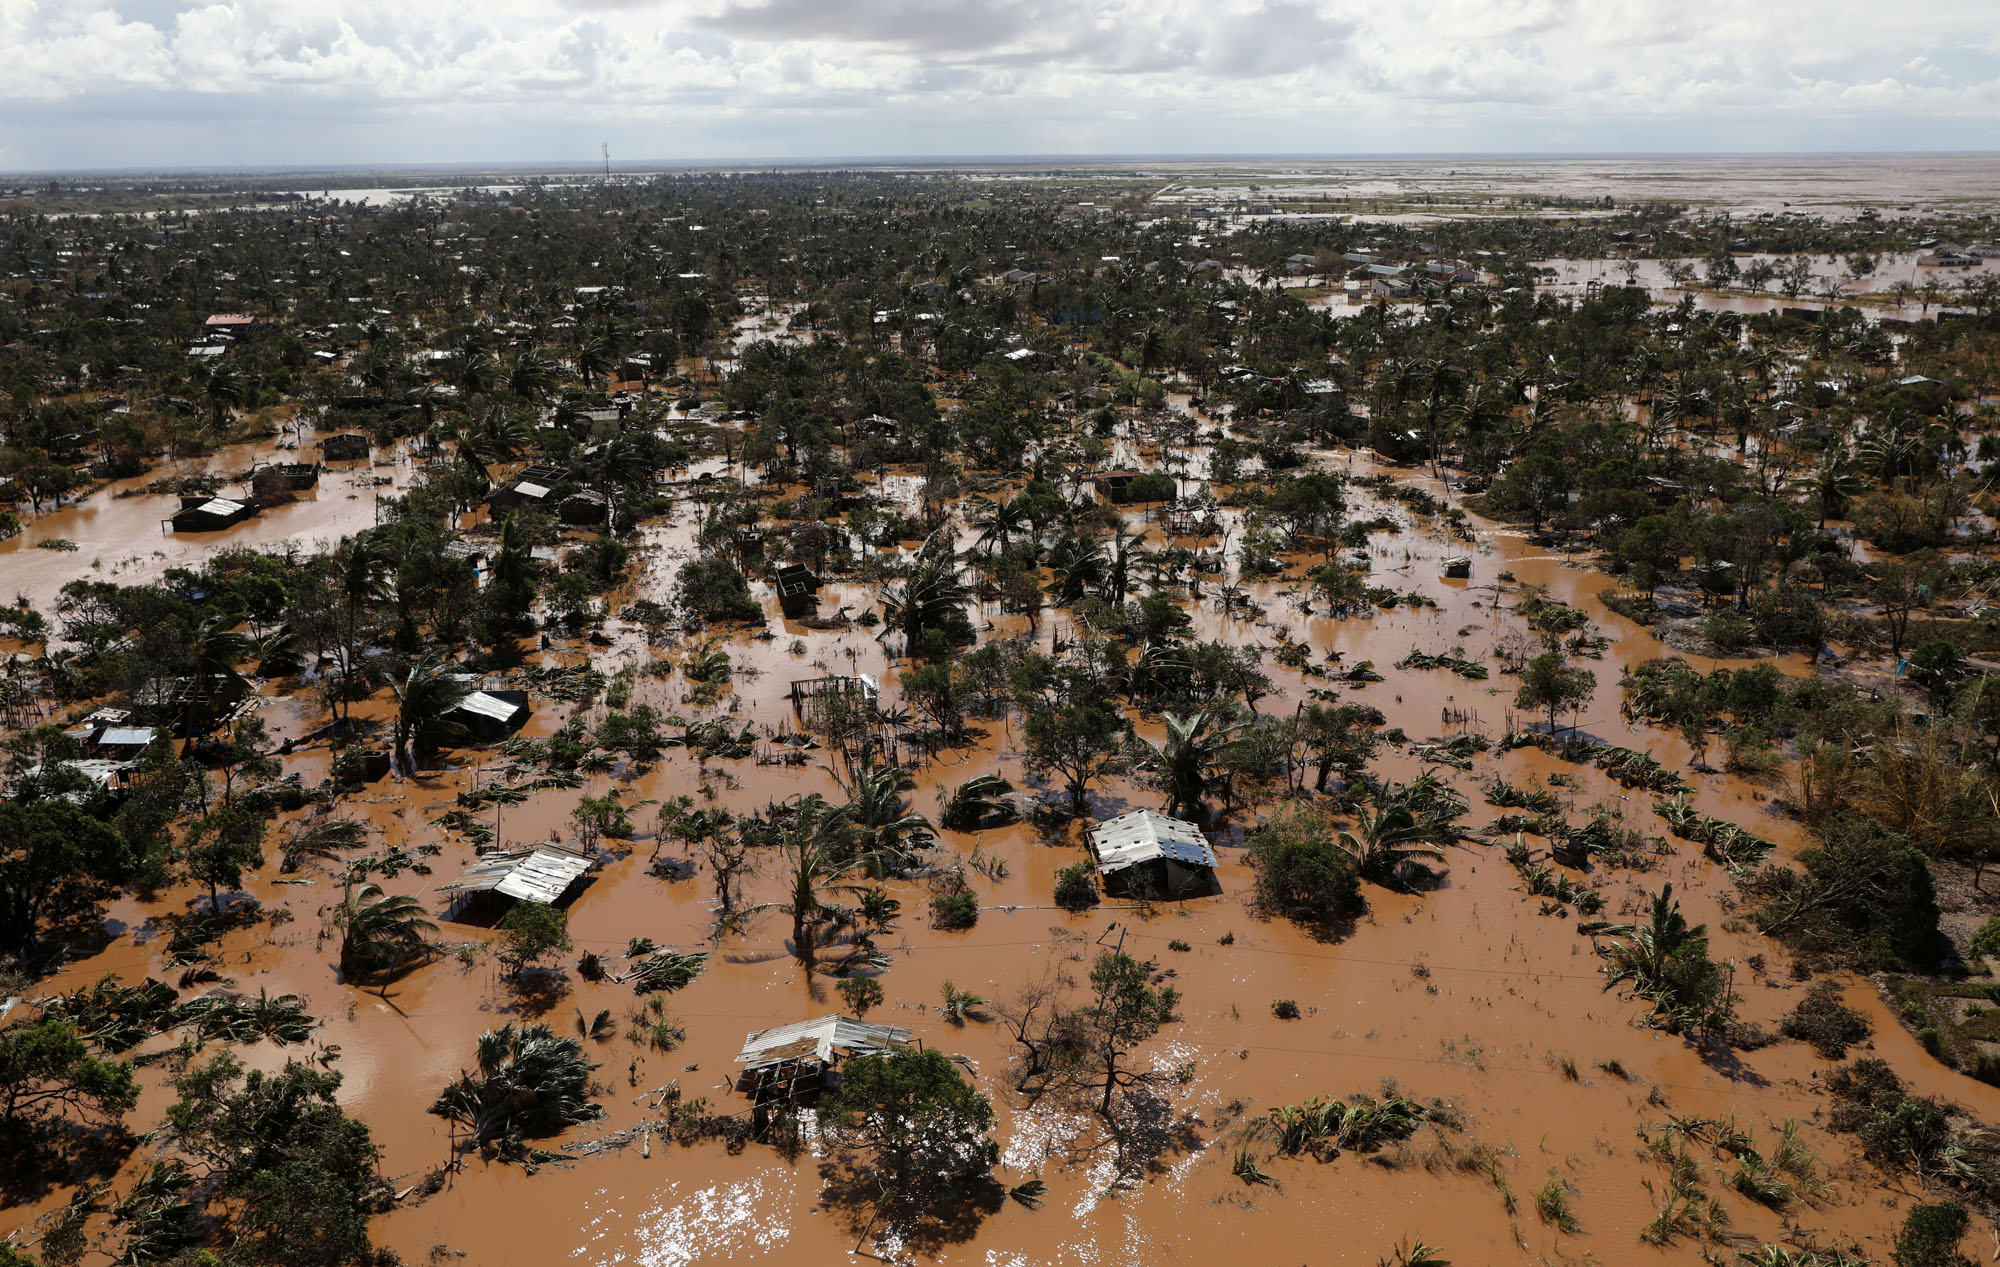 SPECIAL REPORT: THE LONGER TERM IMPLICATIONS OF CYCLONE IDAI IN MOZAMBIQUE